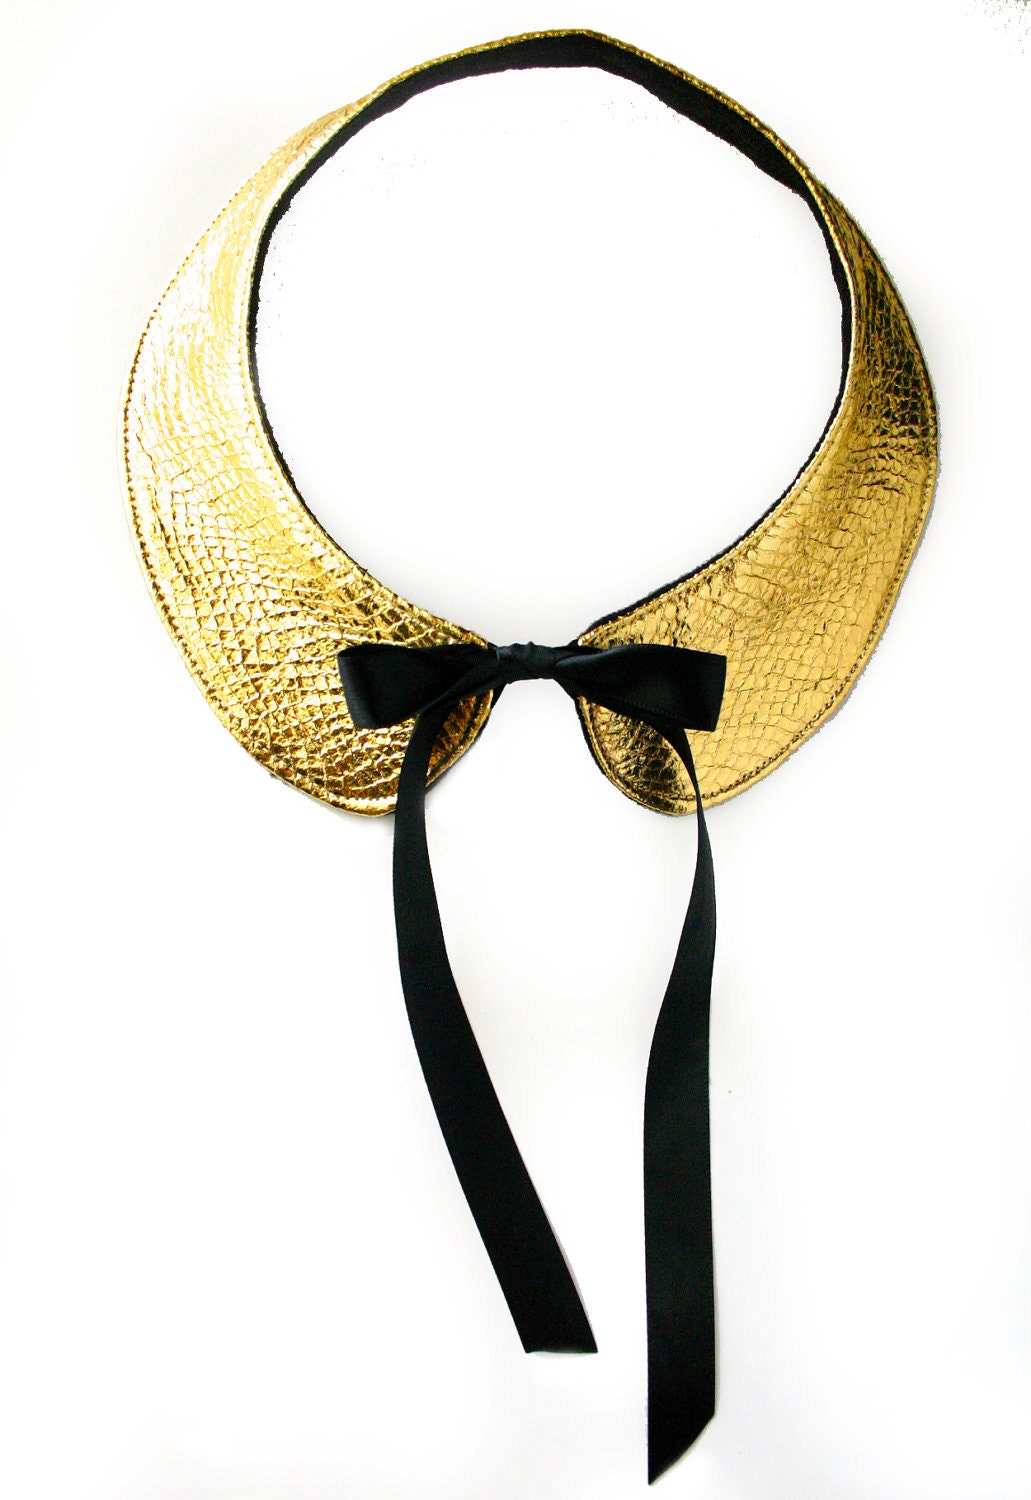 Goldie FEATURED IN Australia's Fashion magazine Shop Til You Drop -  Faux Leather Style Gold Peter Pan Collar